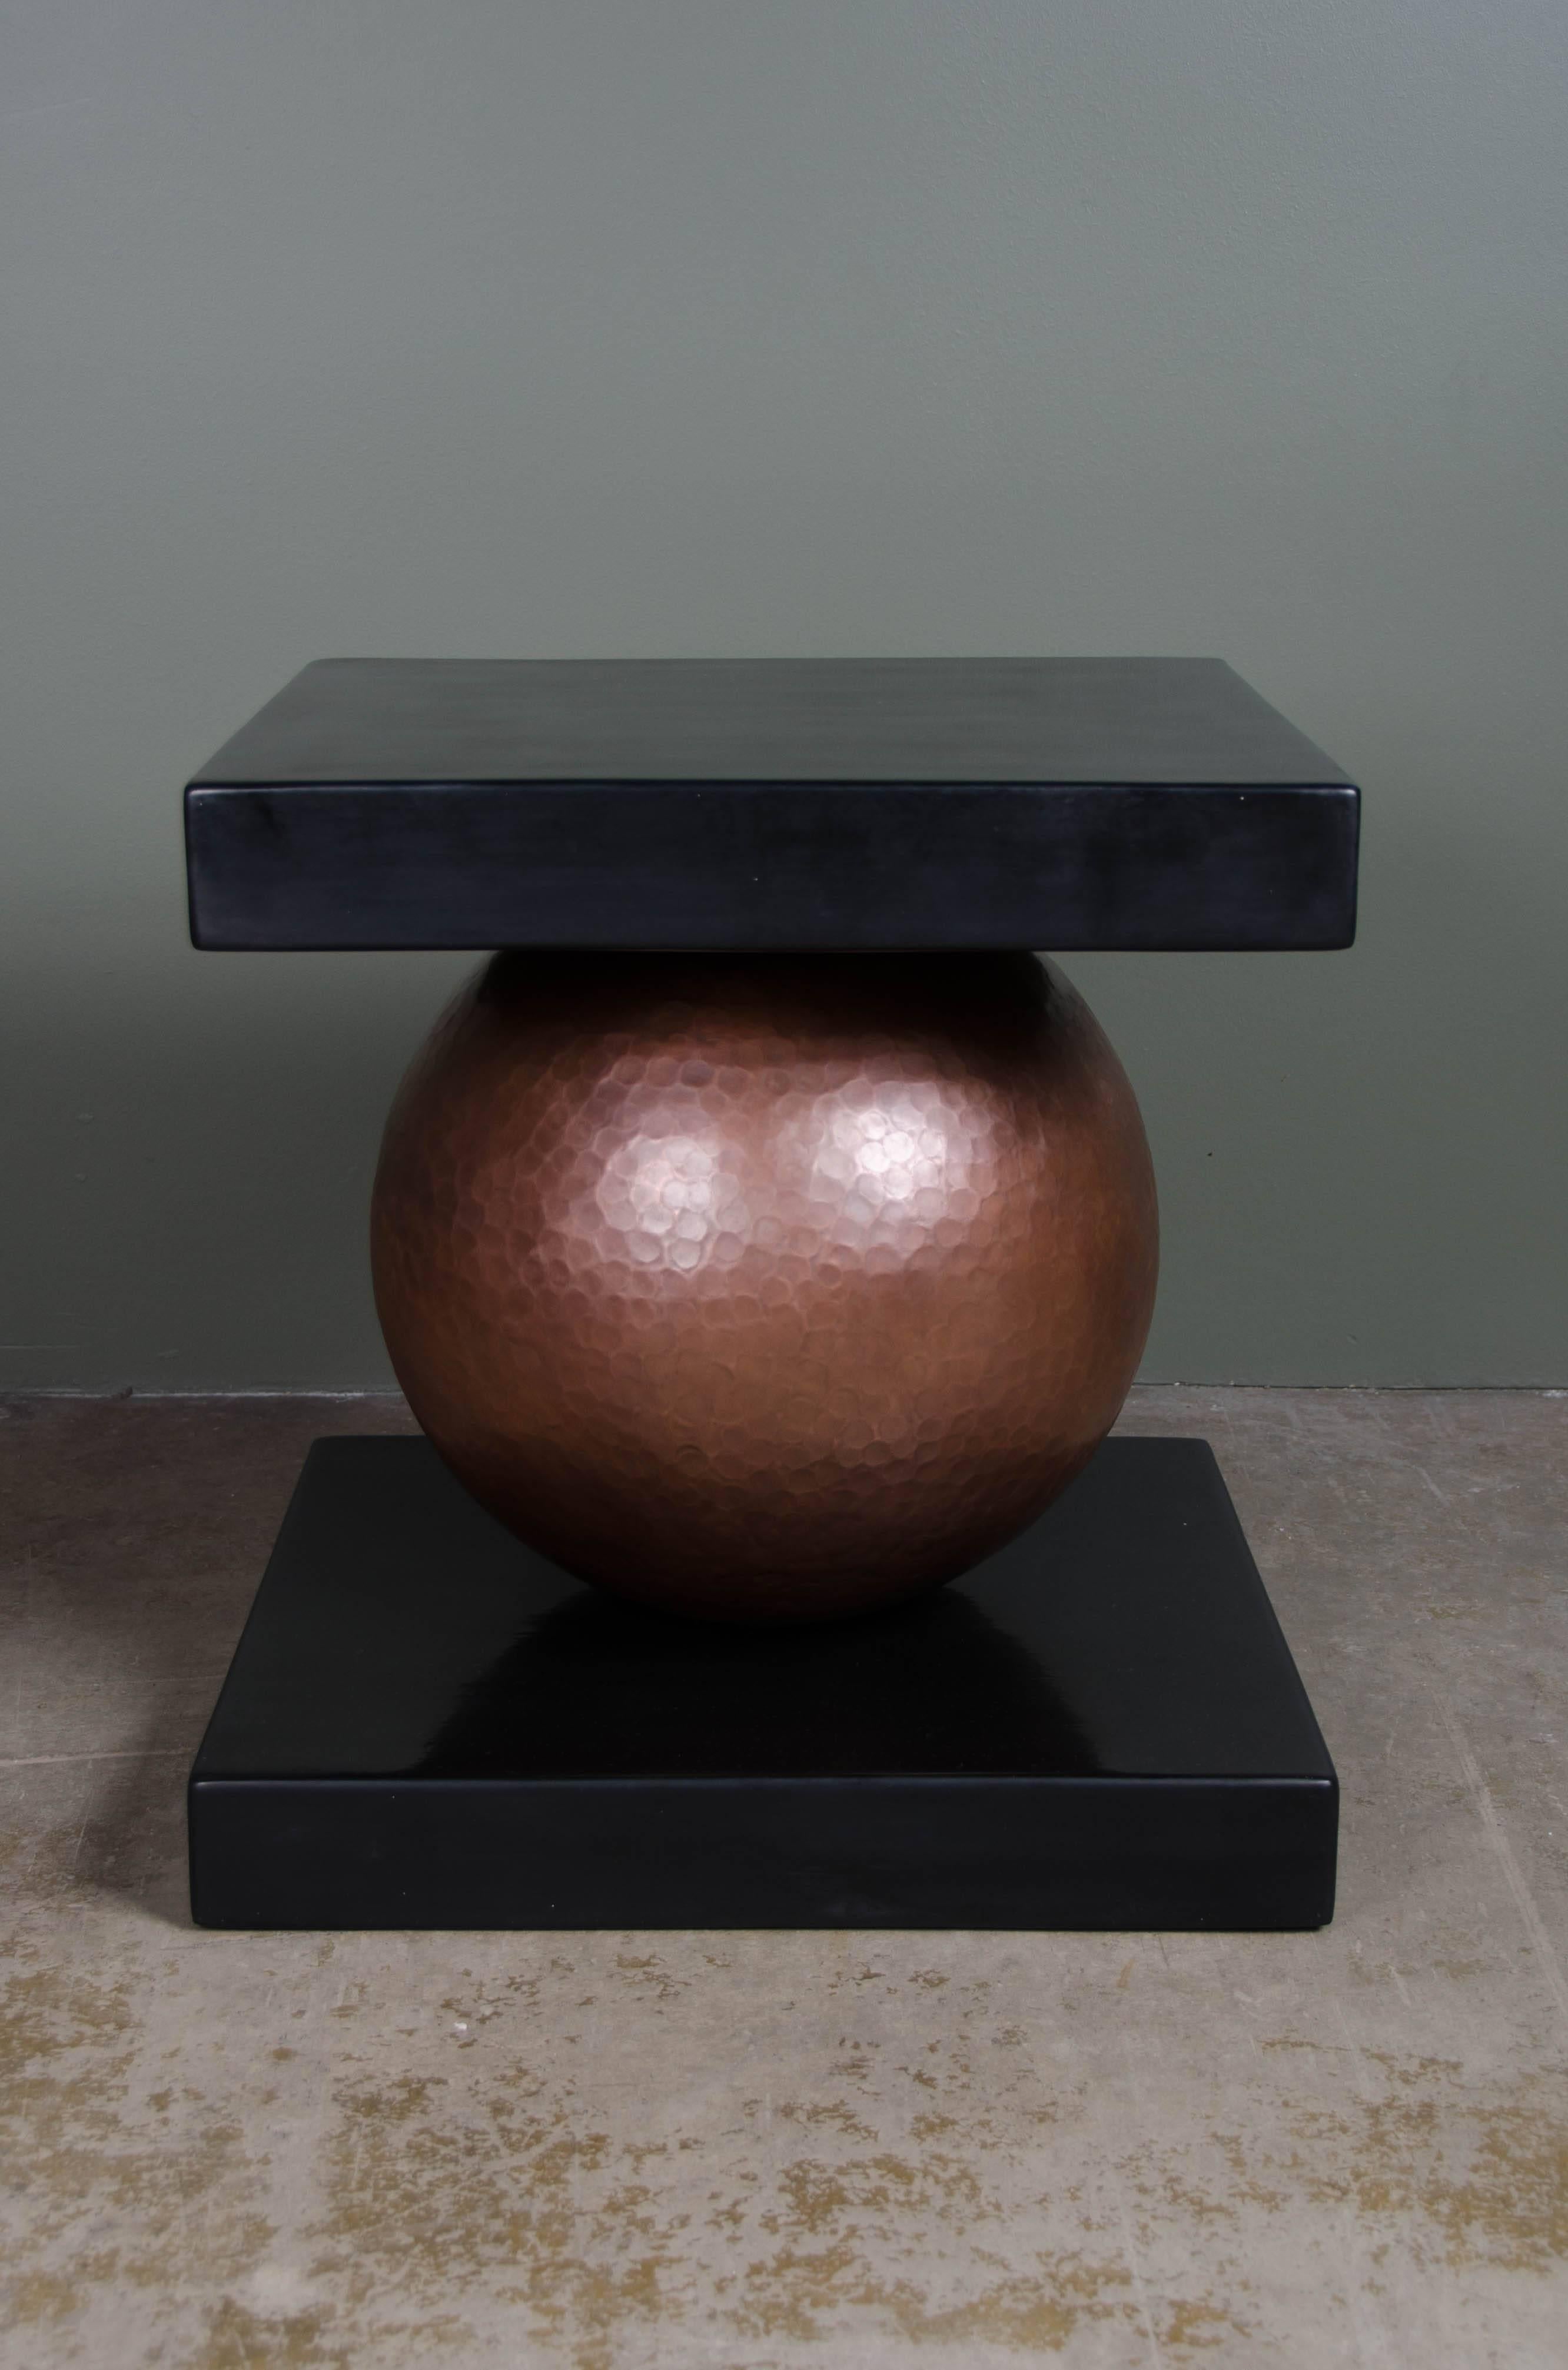 Sphere table
antique copper
black lacquer
hand repoussé
limited edition side table.

Lacquer is a technique that dates back to the Shang dynasty, circa 1600-1100 B.C. These pieces are made with at least 60 coats of organic lacquer. Each layer of